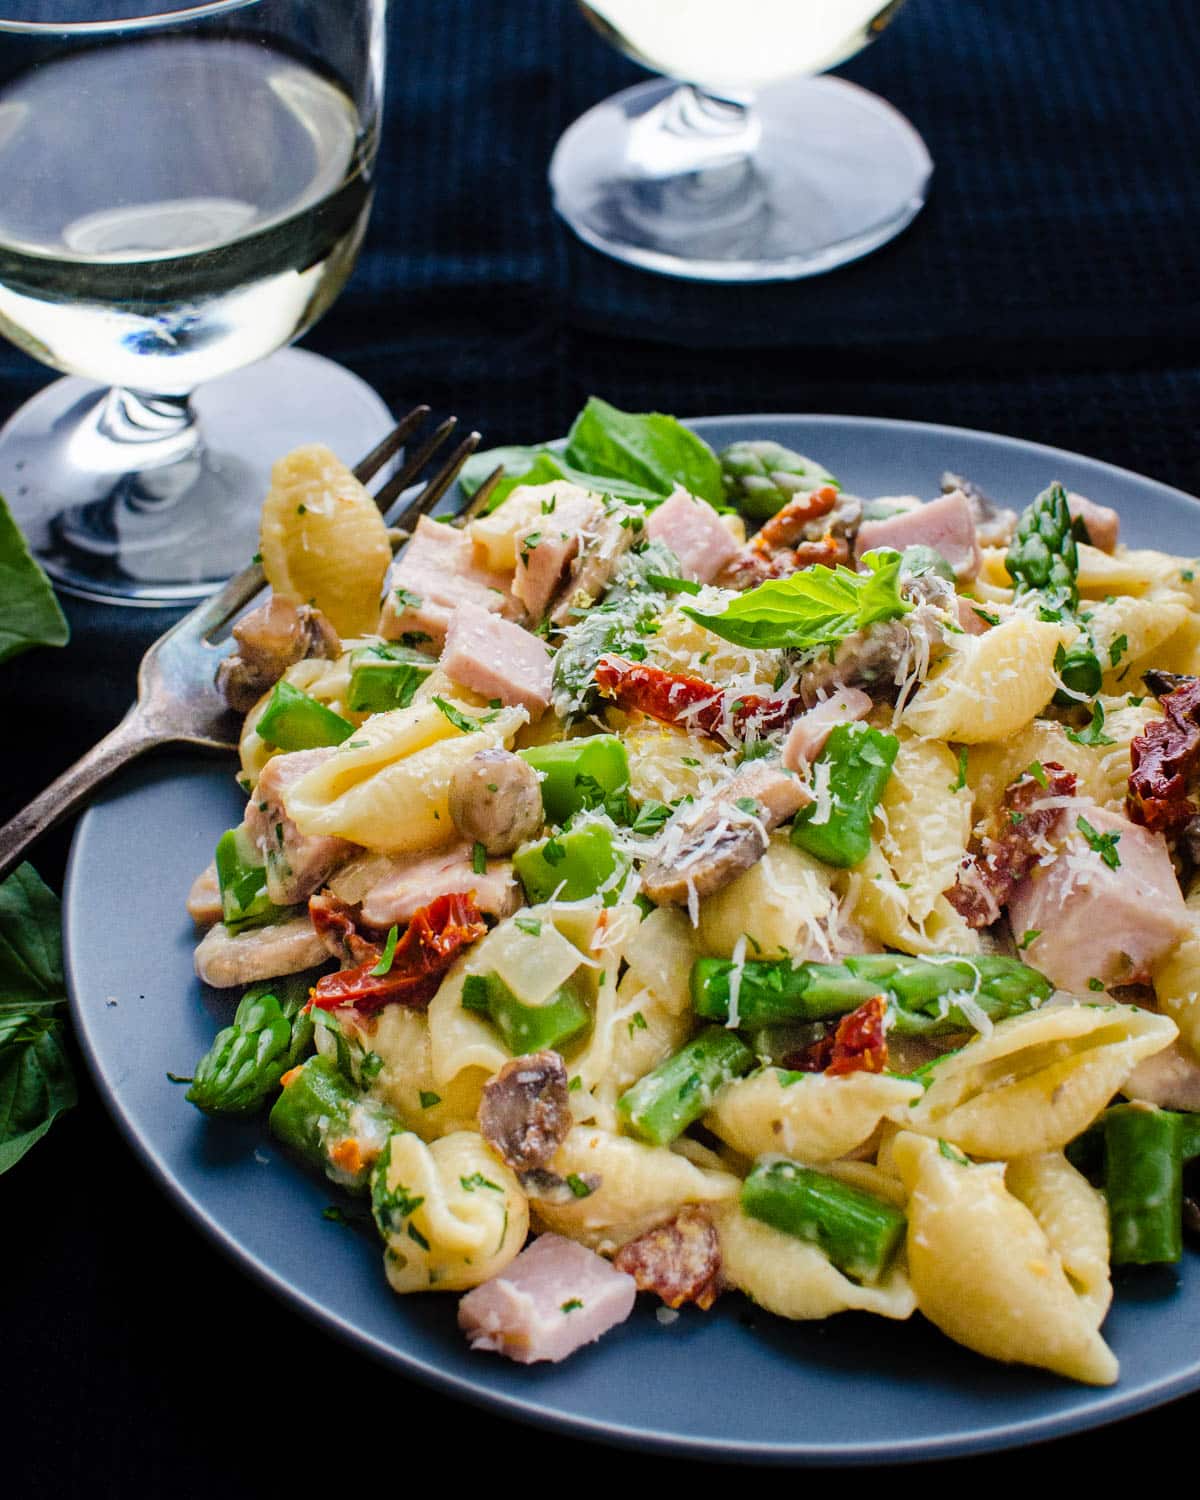 A plate of pasta primavera with asparagus, ham and sun-dried tomatoes.